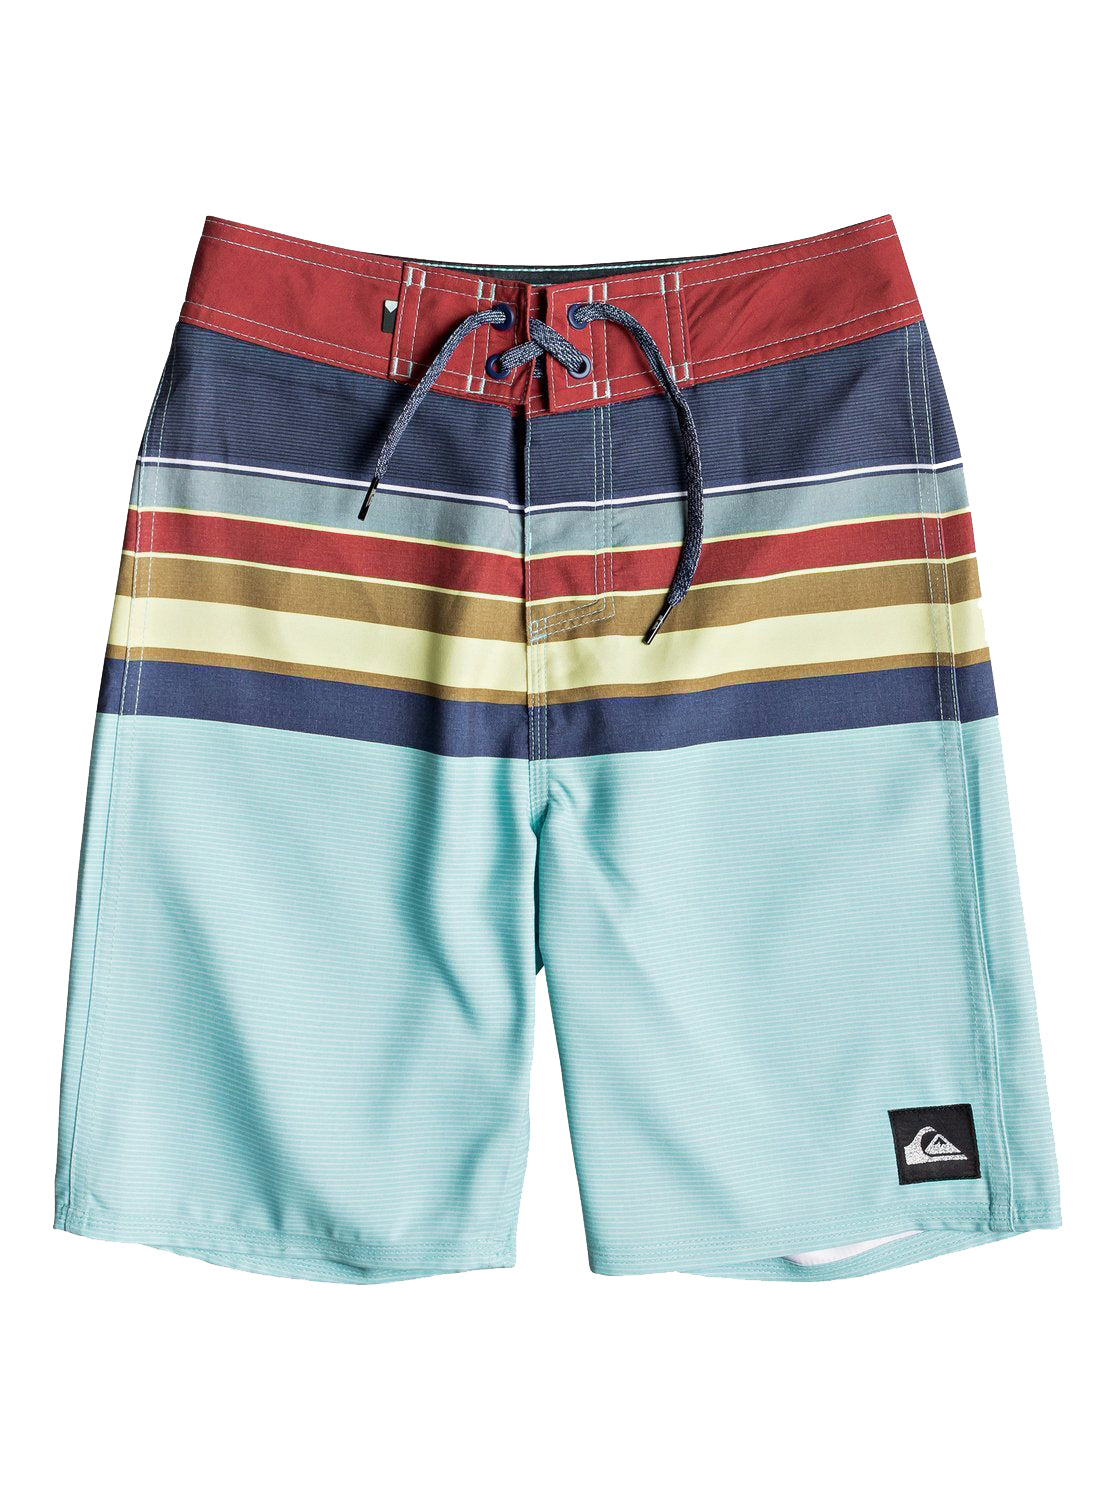 Quiksilver Swell Vision Youth boardshort BST6 28